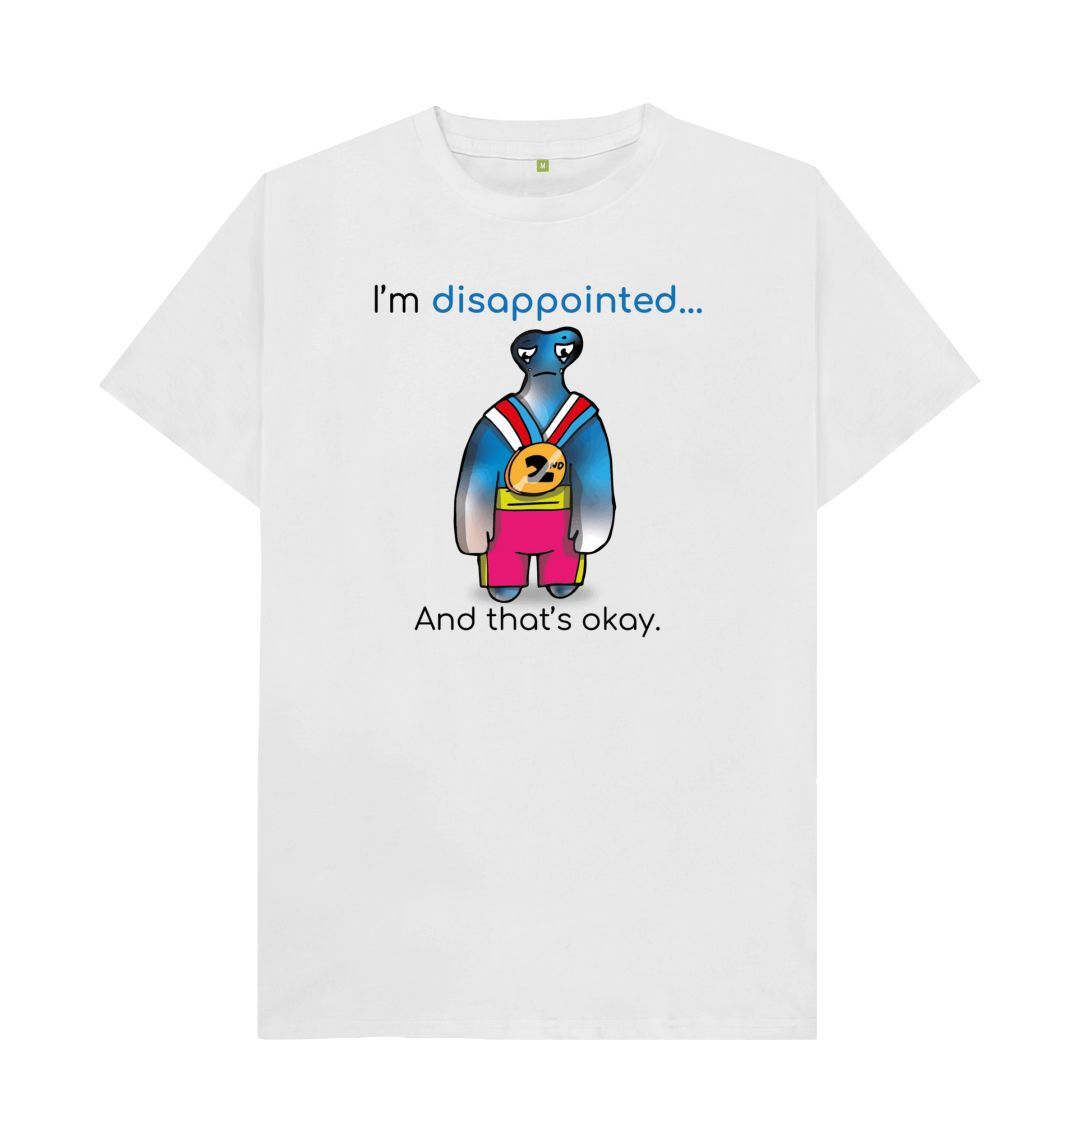 White Disappointed Emotion Men's Organic Mental Health T-Shirt